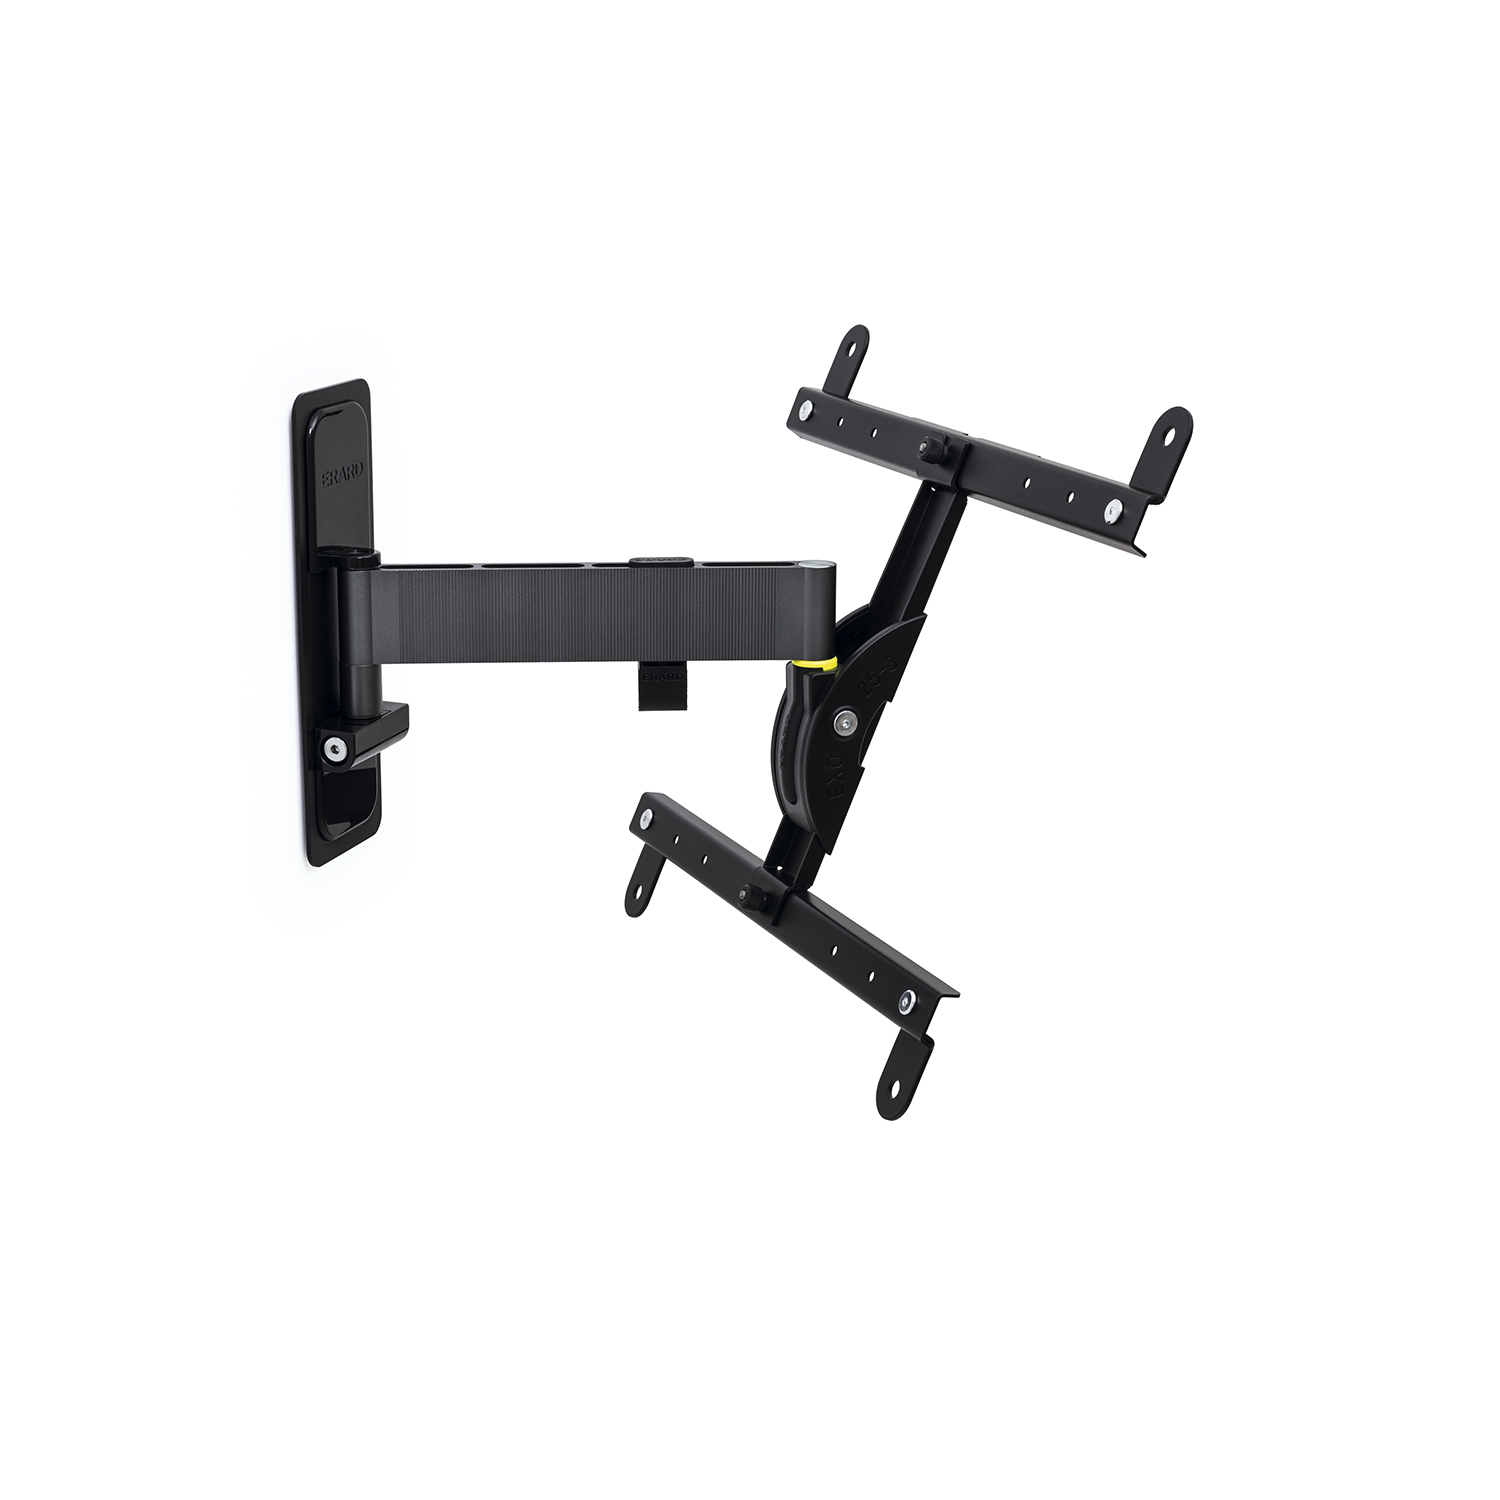 EXO 400TW1 - support mural inclinable orientable